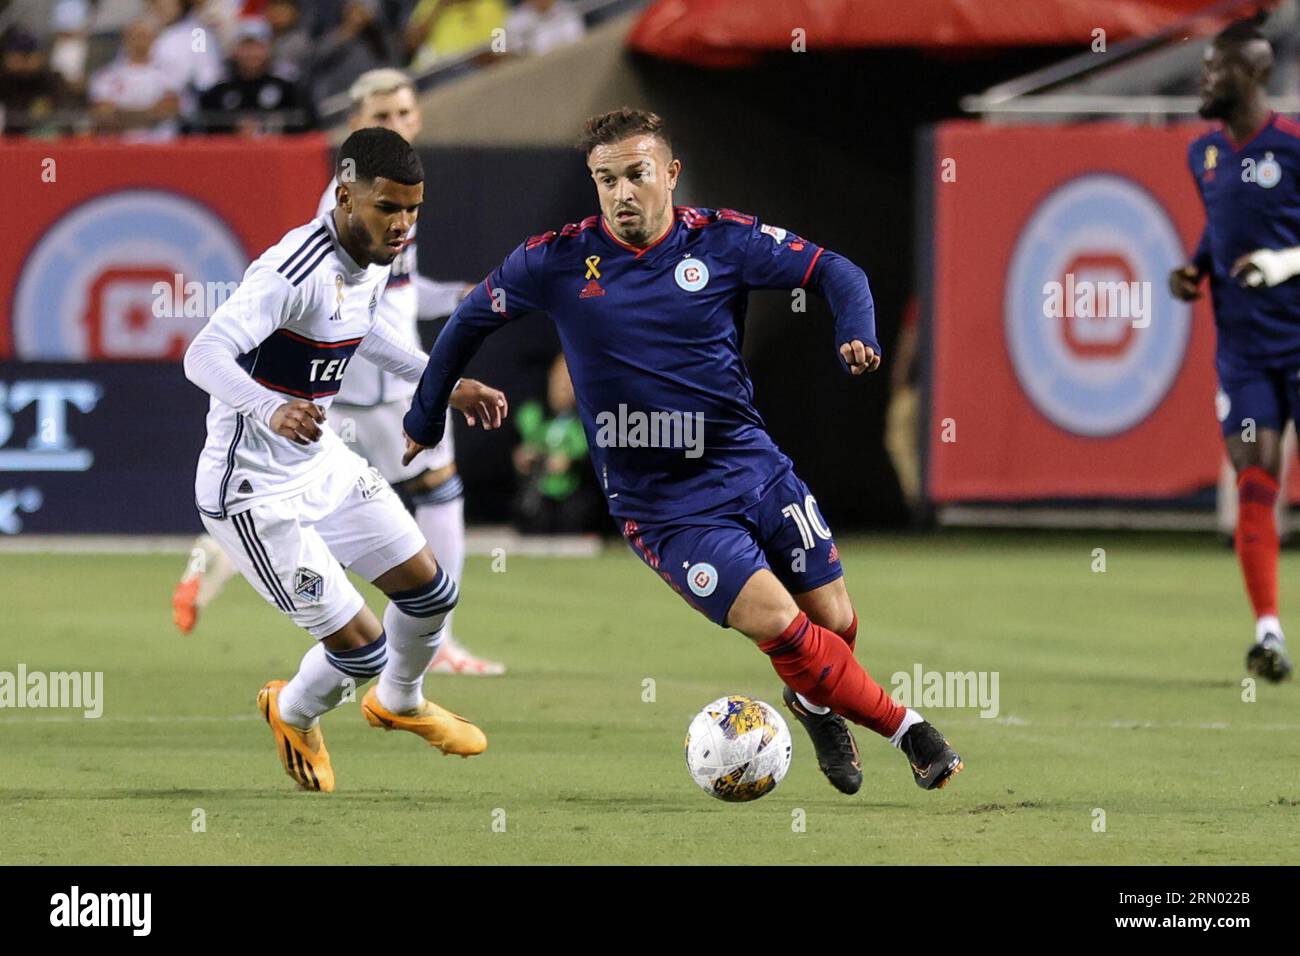 Chicago, USA. 30th Aug, 2023. Chicago, USA, August 30, 2023: Xherdan Shaqiri (10 Chicago Fire FC) in action during the game between Chicago Fire FC and Vancouver Whitecaps on Wednesday August 30, 2023 at Soldier Field, Chicago, USA. (NO COMMERCIAL USAGE) (Shaina Benhiyoun/SPP) Credit: SPP Sport Press Photo. /Alamy Live News Stock Photo